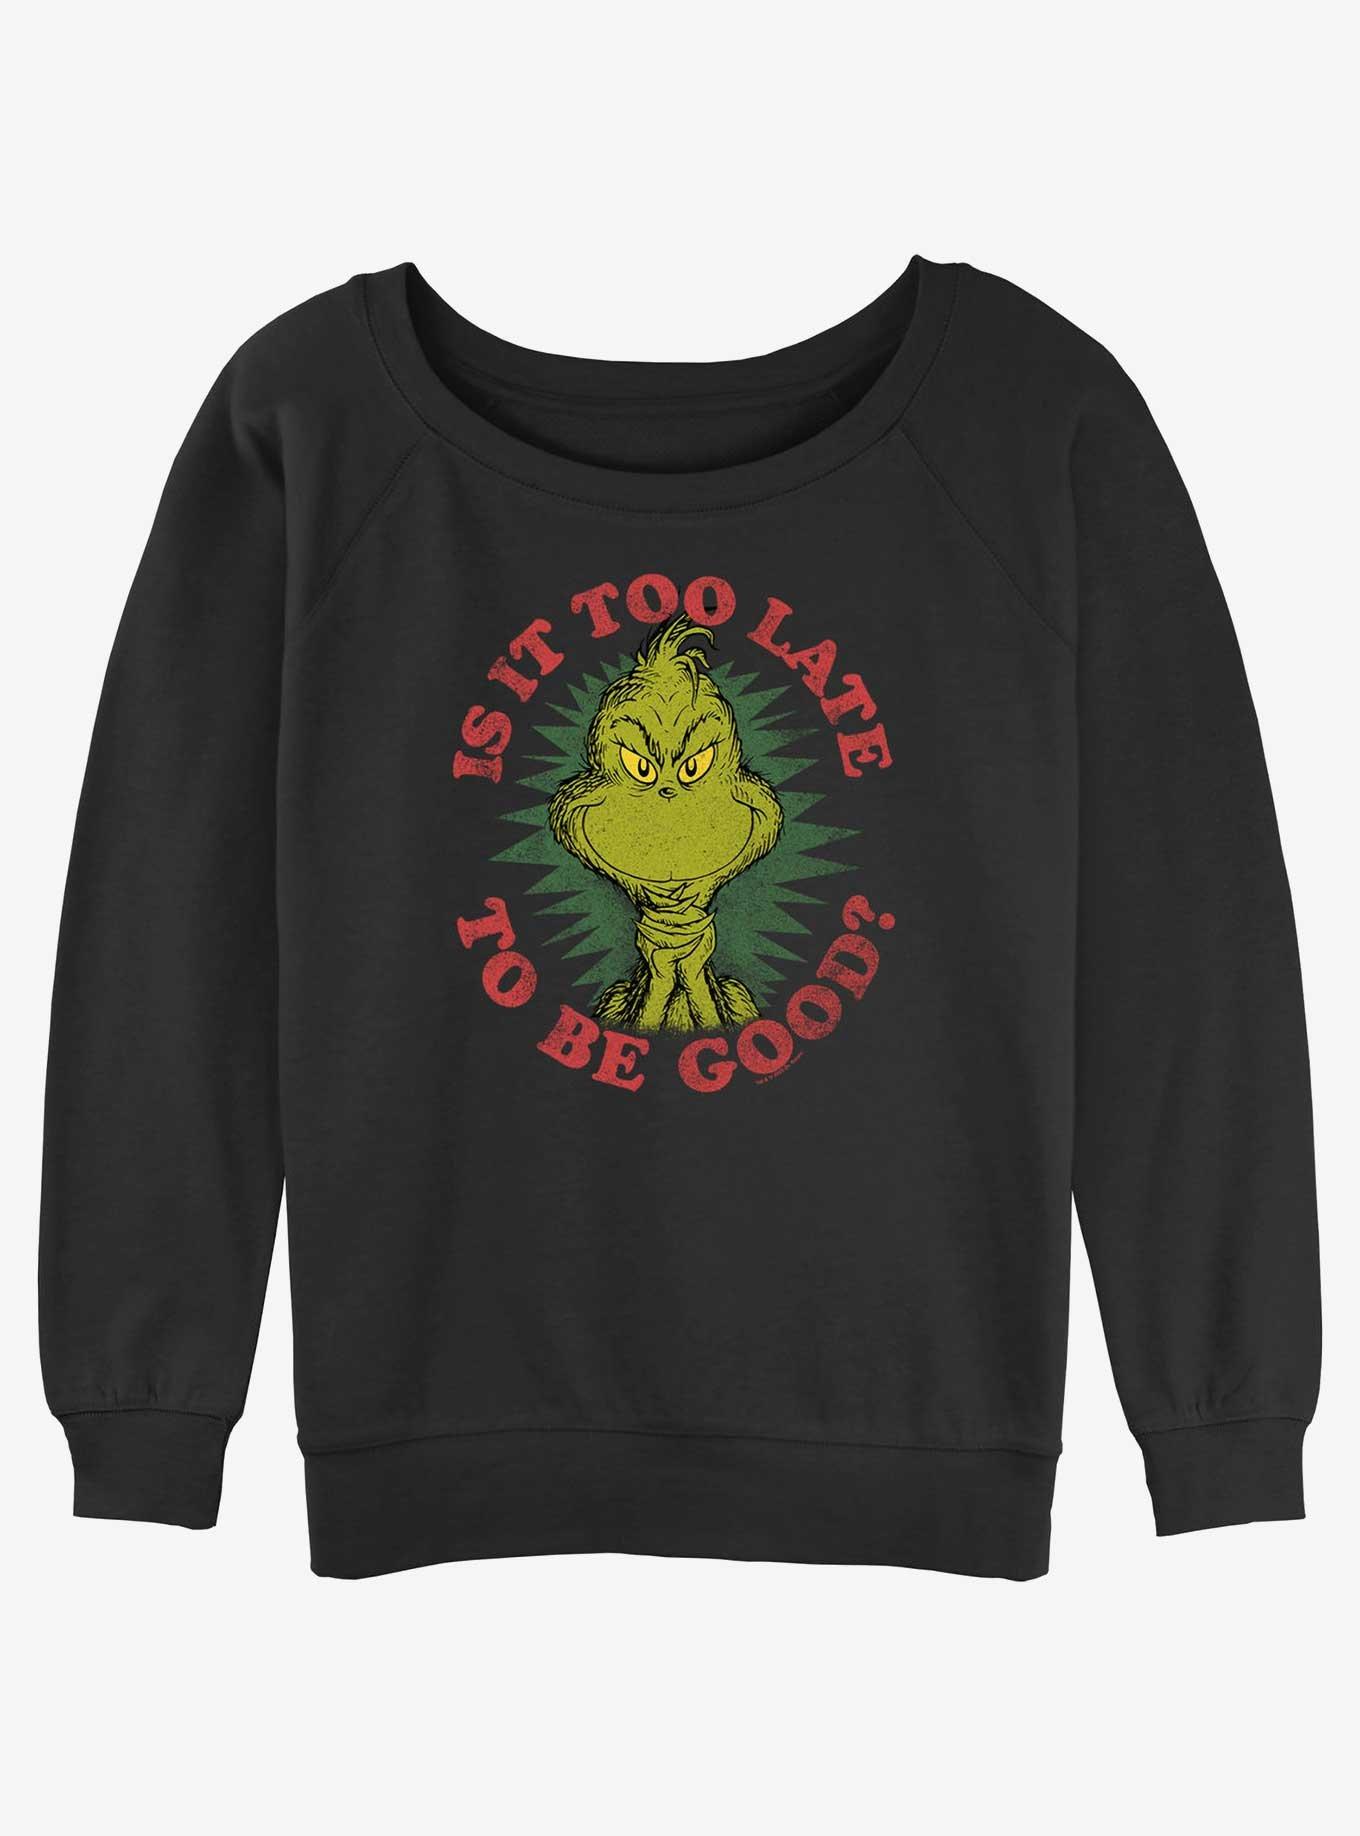 Dr. Seuss Grinch Is It Too Late To Be Good Womens Slouchy Sweatshirt, BLACK, hi-res